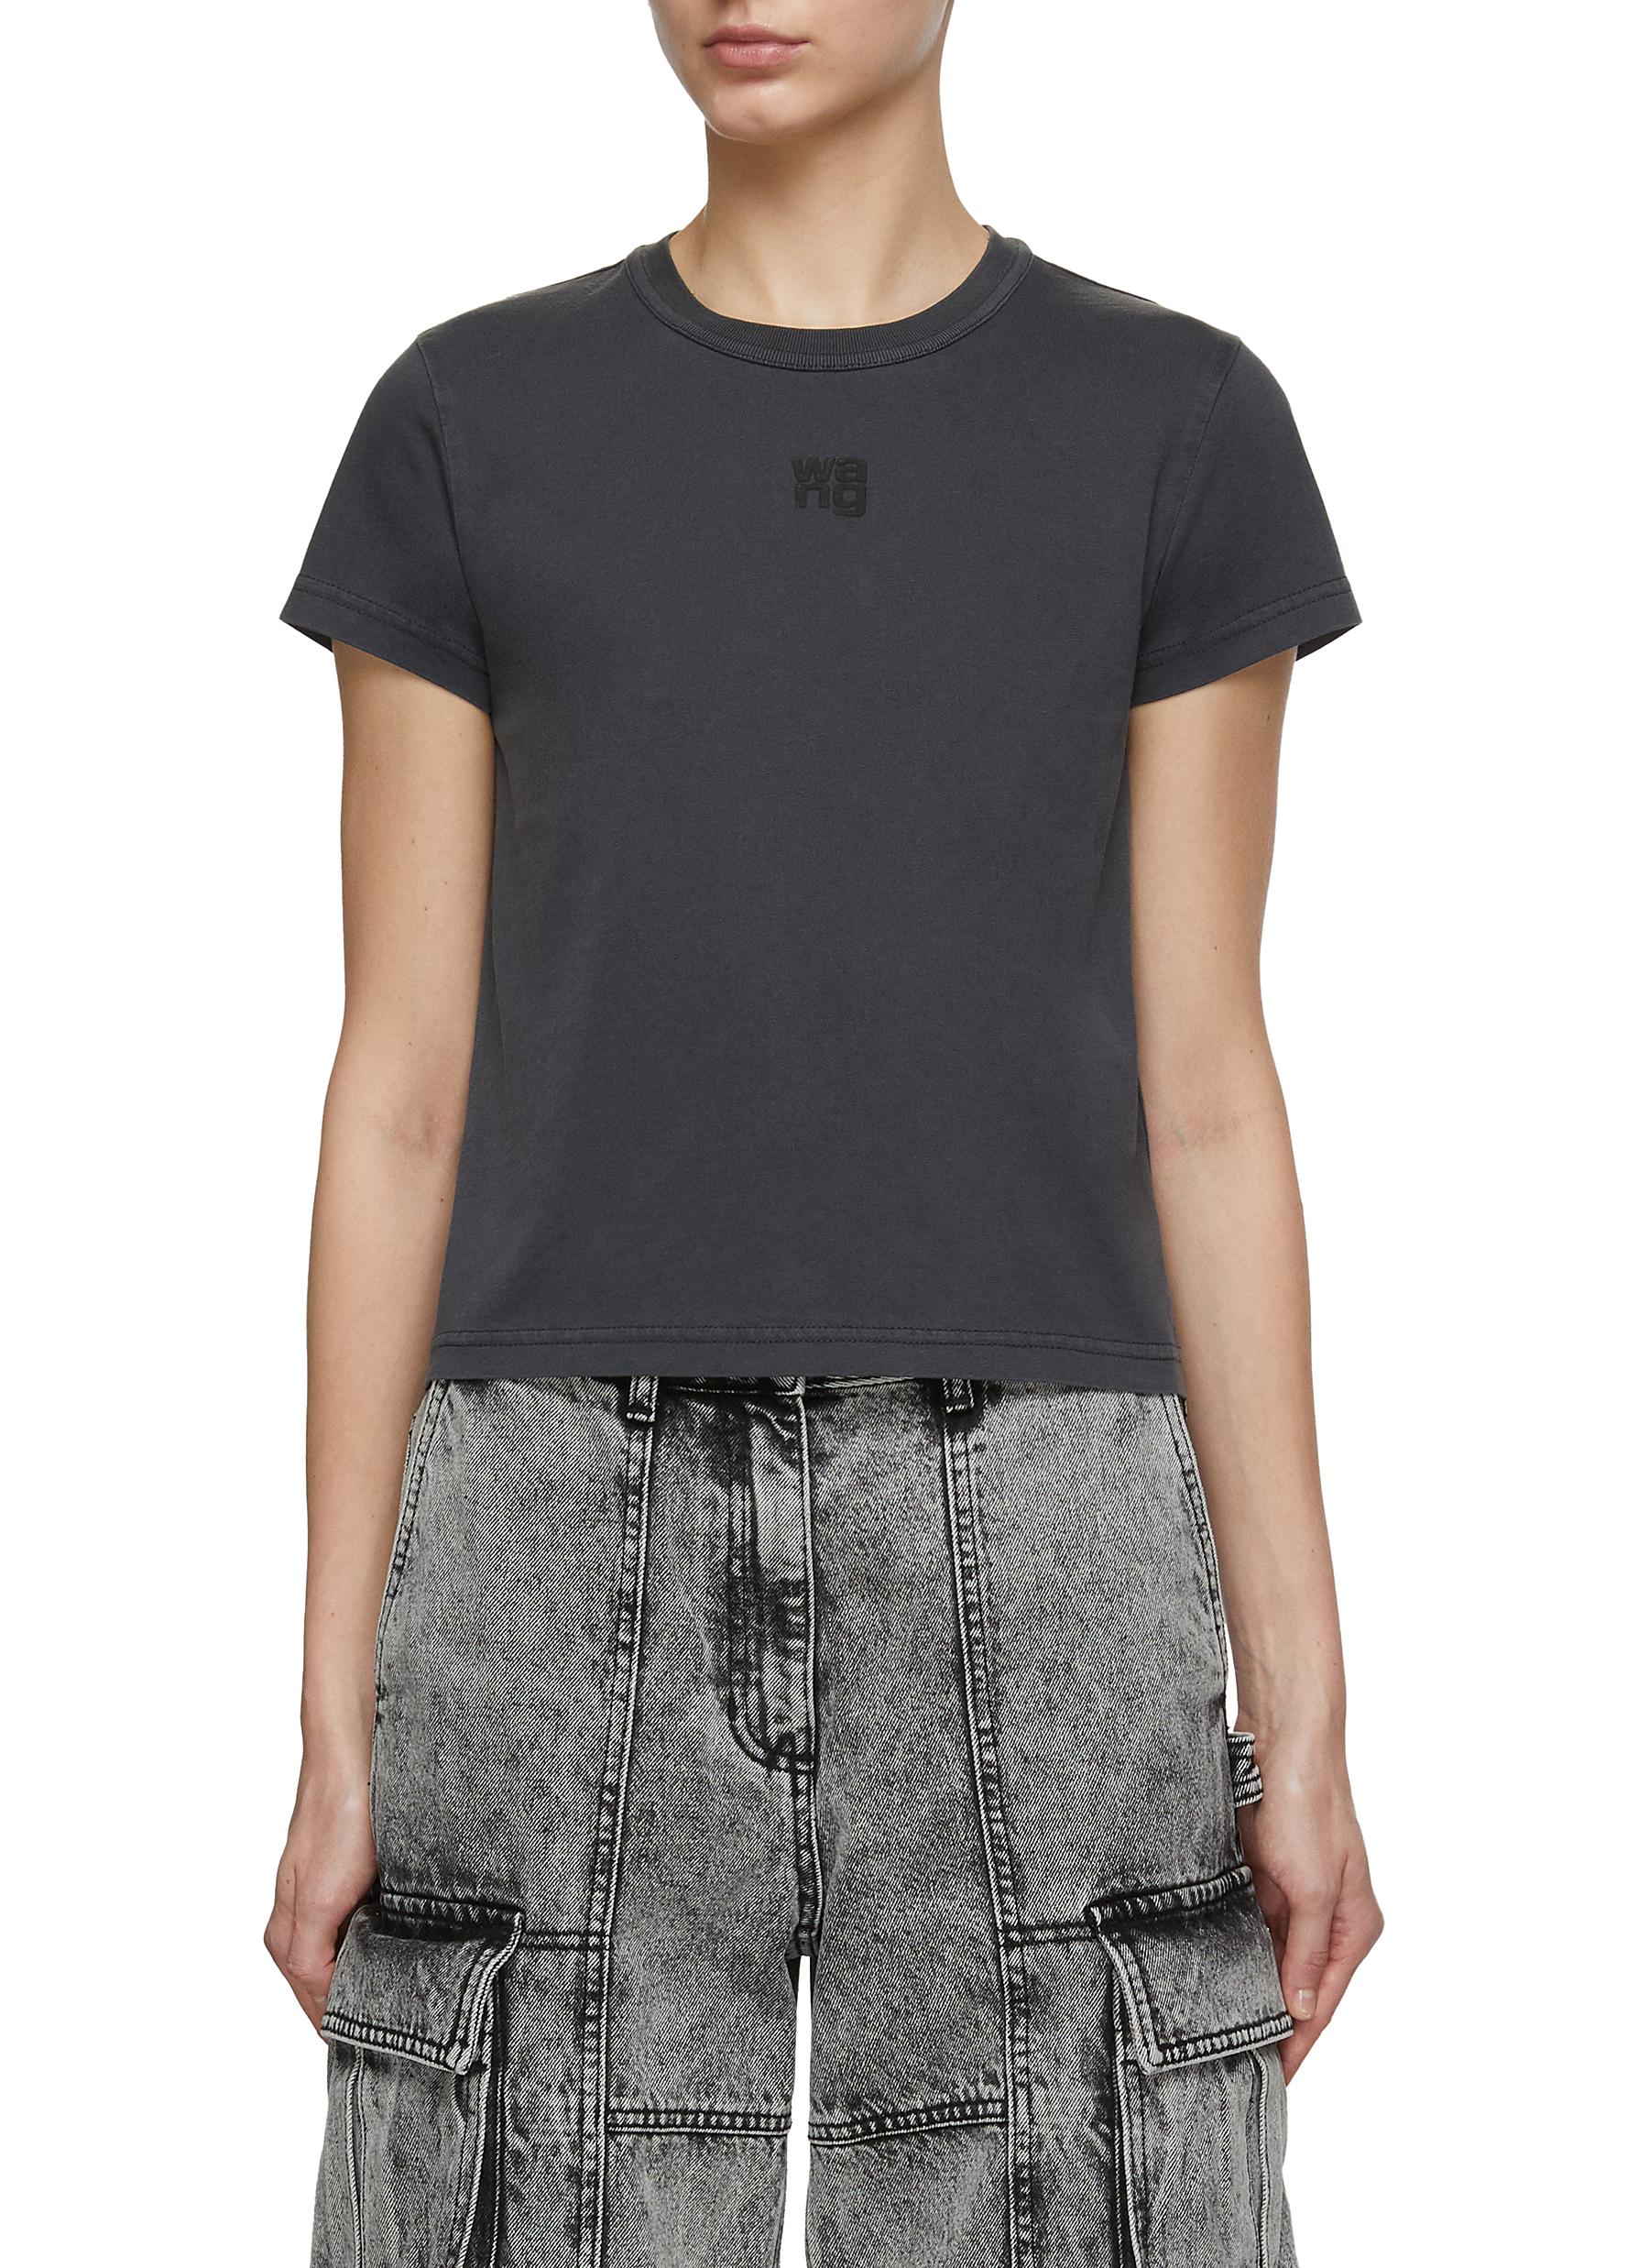 Gray Patch Sweater by Alexander Wang on Sale